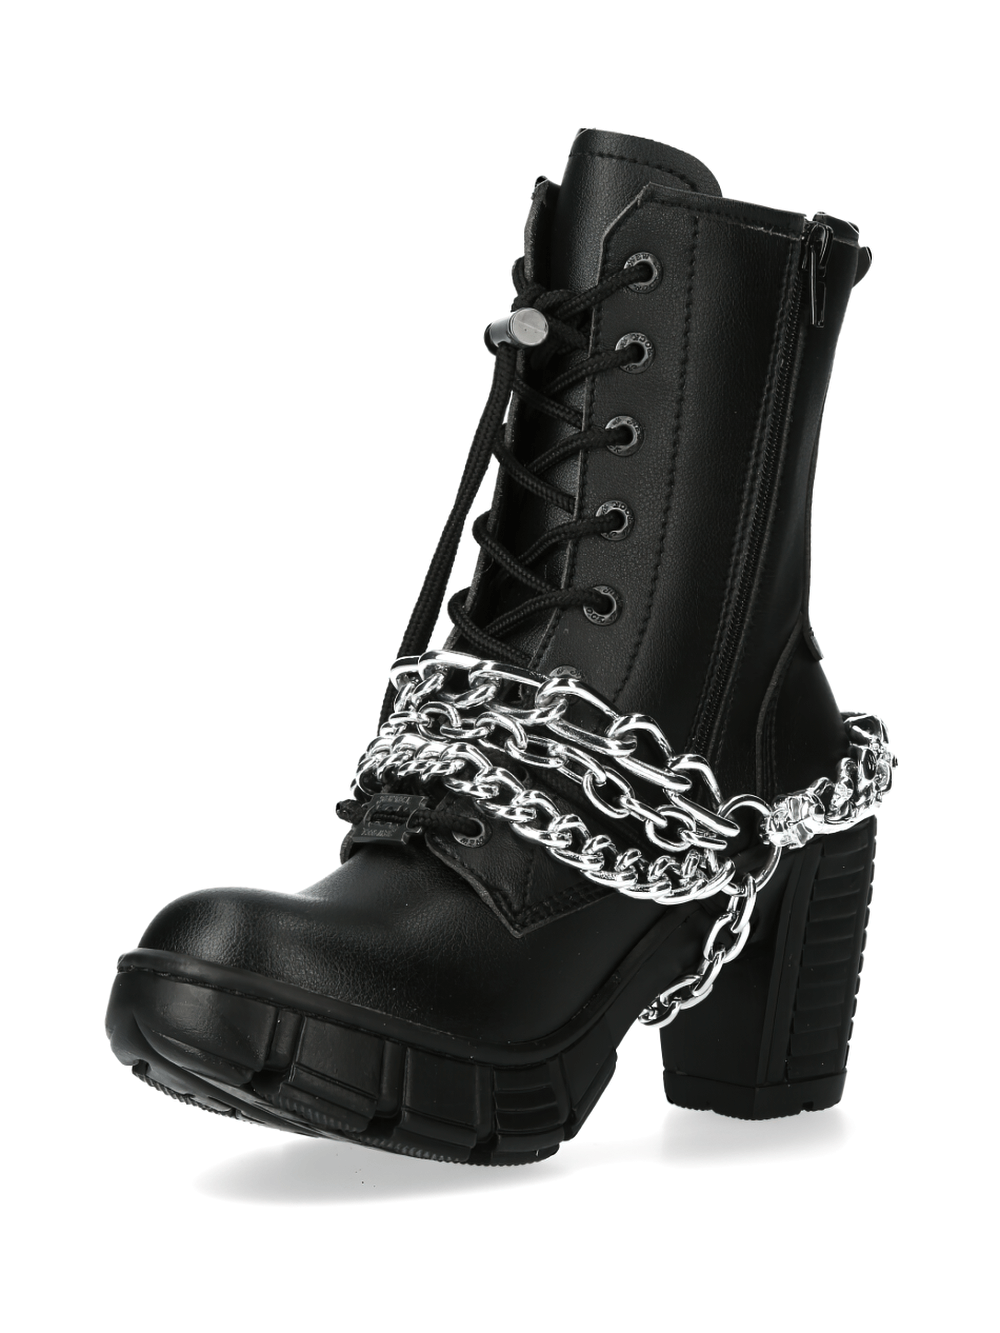 NEW ROCK Chain-Linked Black Ankle Boots with Zipper